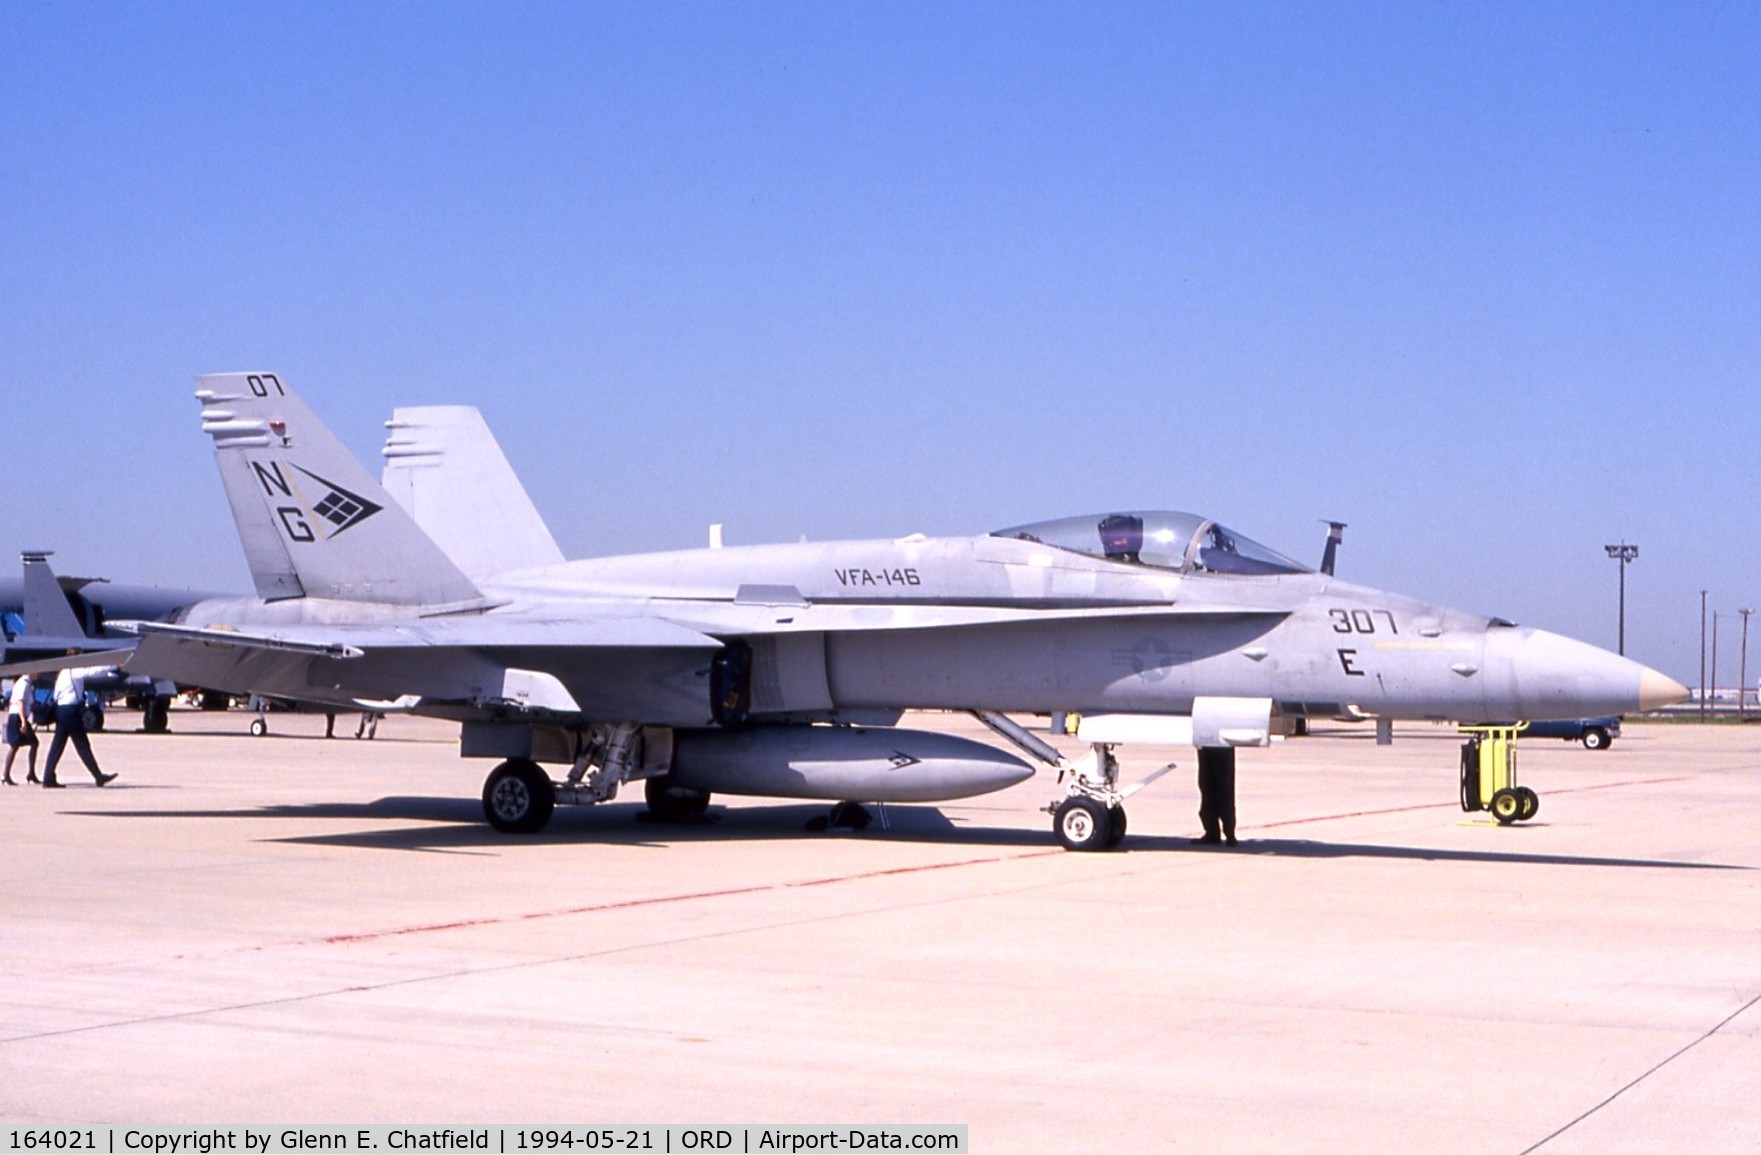 164021, 1990 McDonnell Douglas F/A-18C Hornet C/N 0905/C162, F/A-18C at the ANG/AFR open house